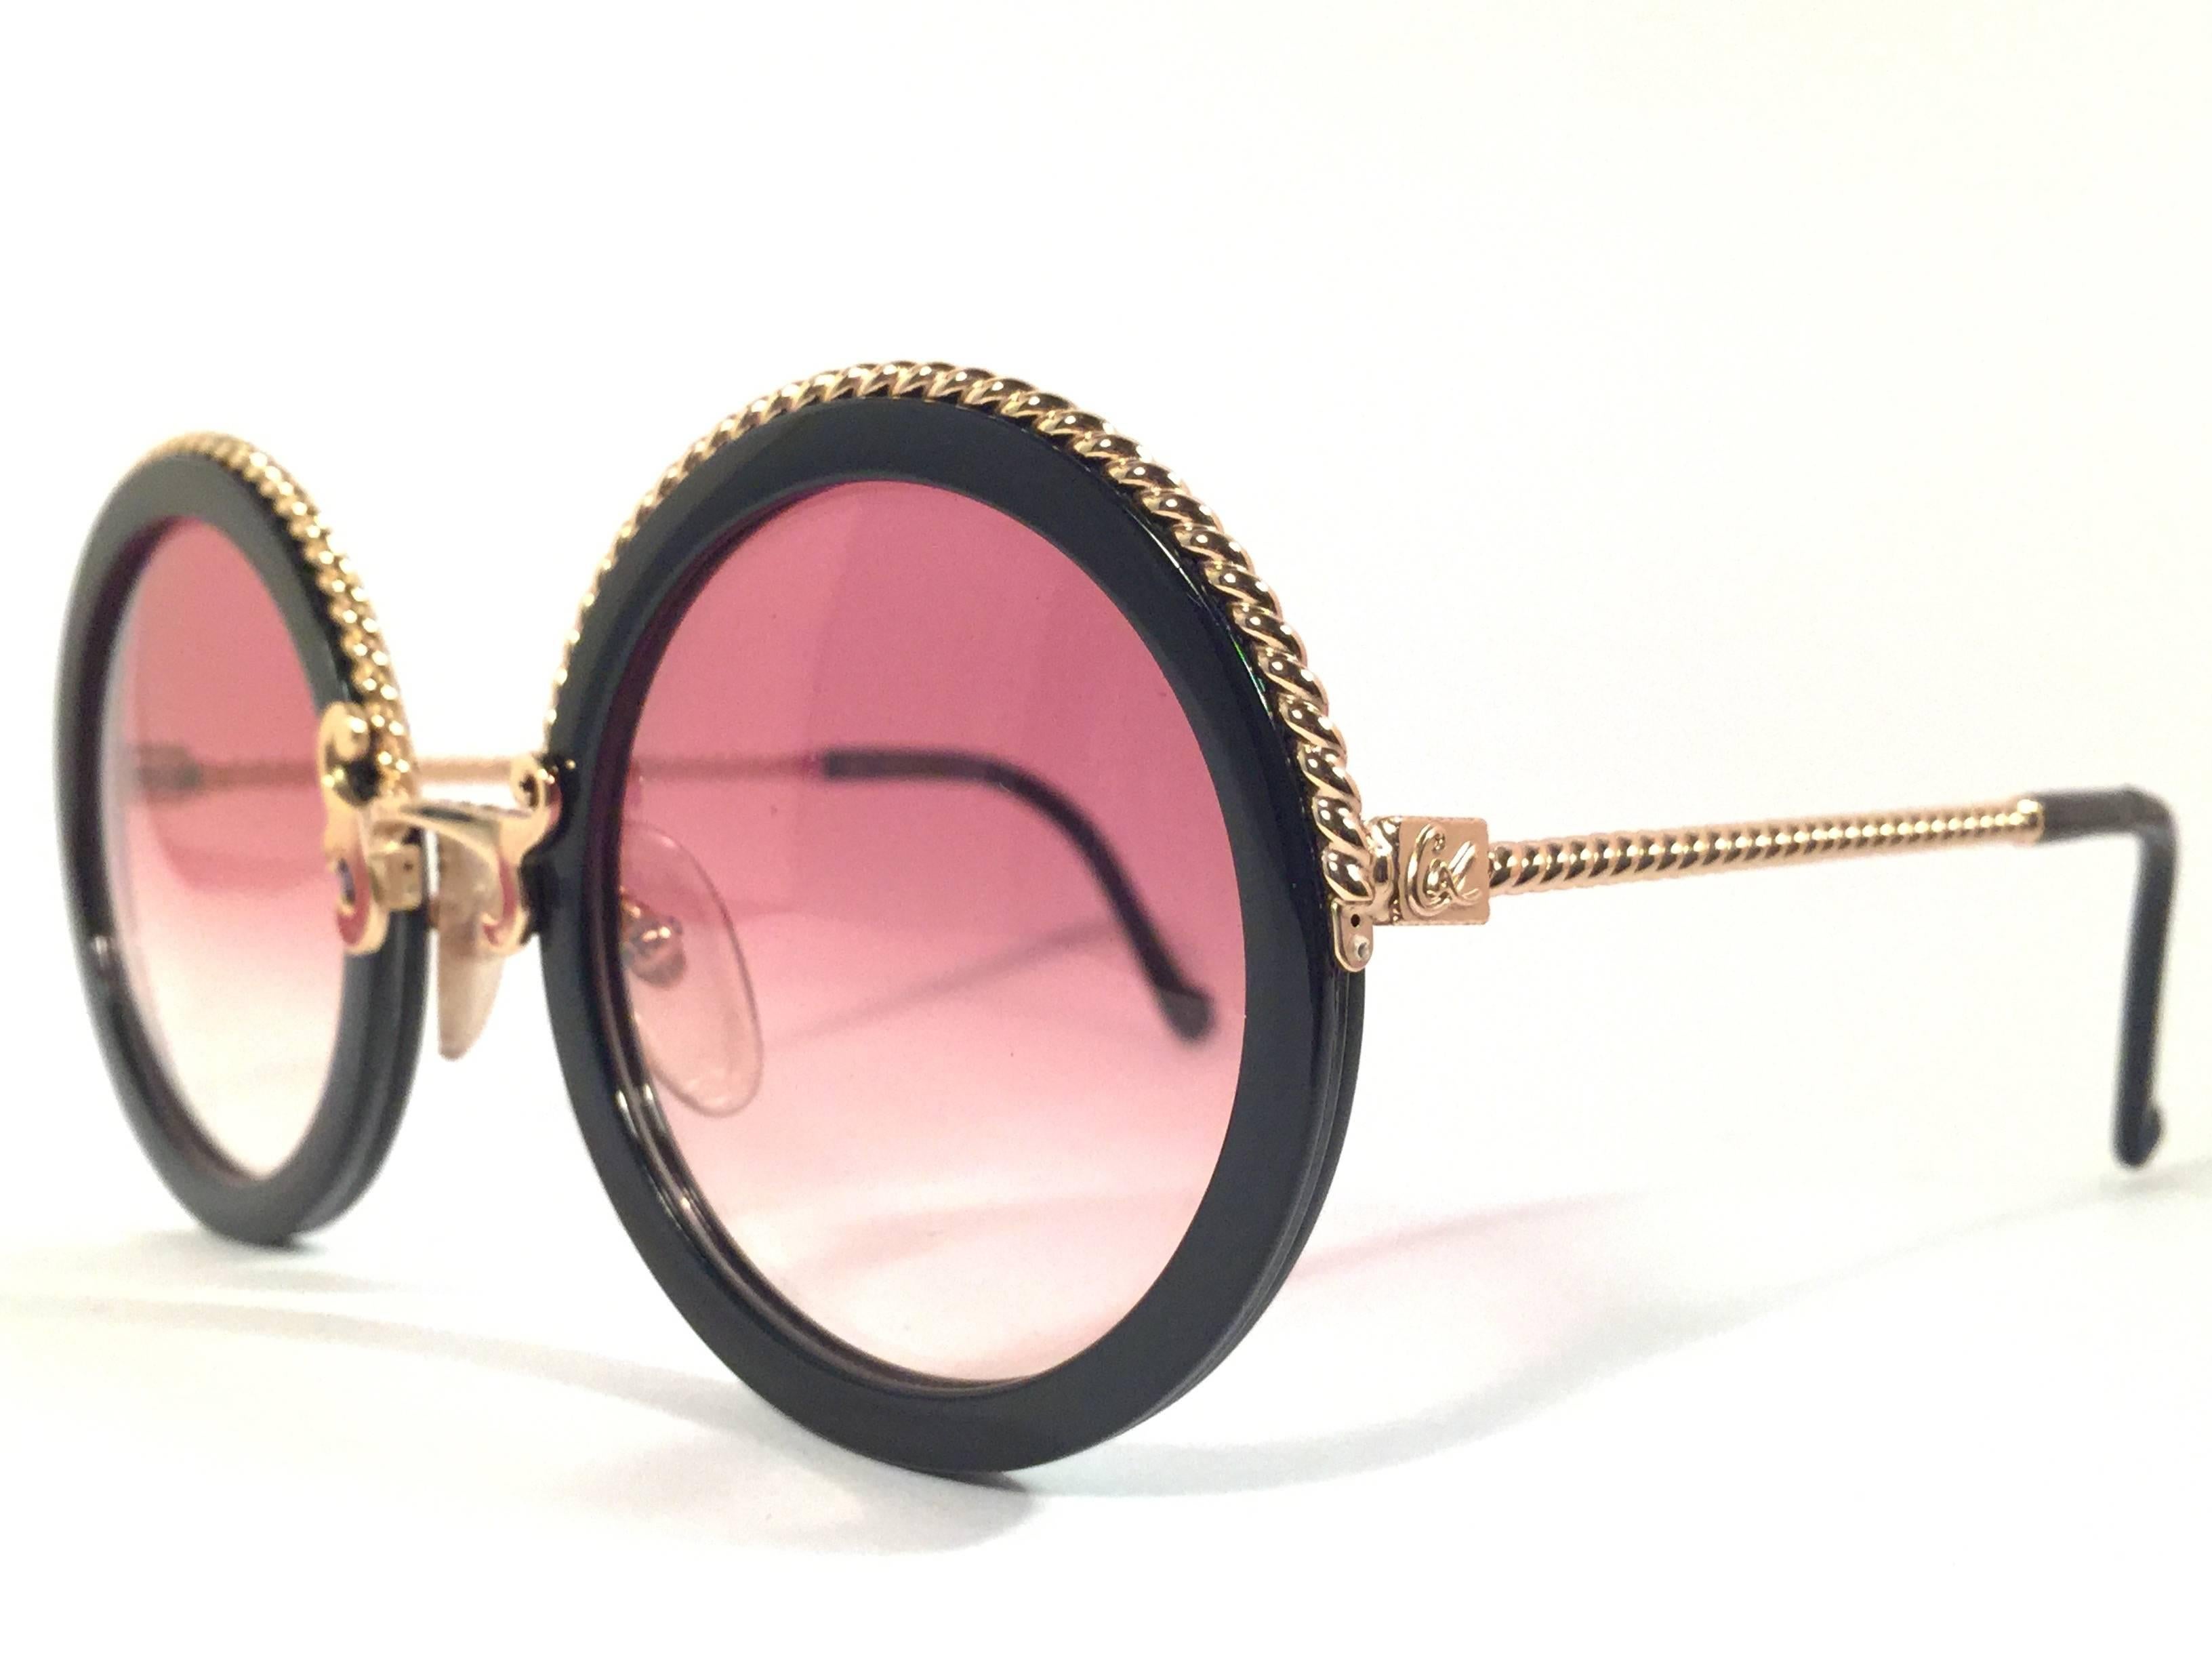 Pink New Vintage Christian Lacroix Round Black Gold Accents 1980 France Sunglasses